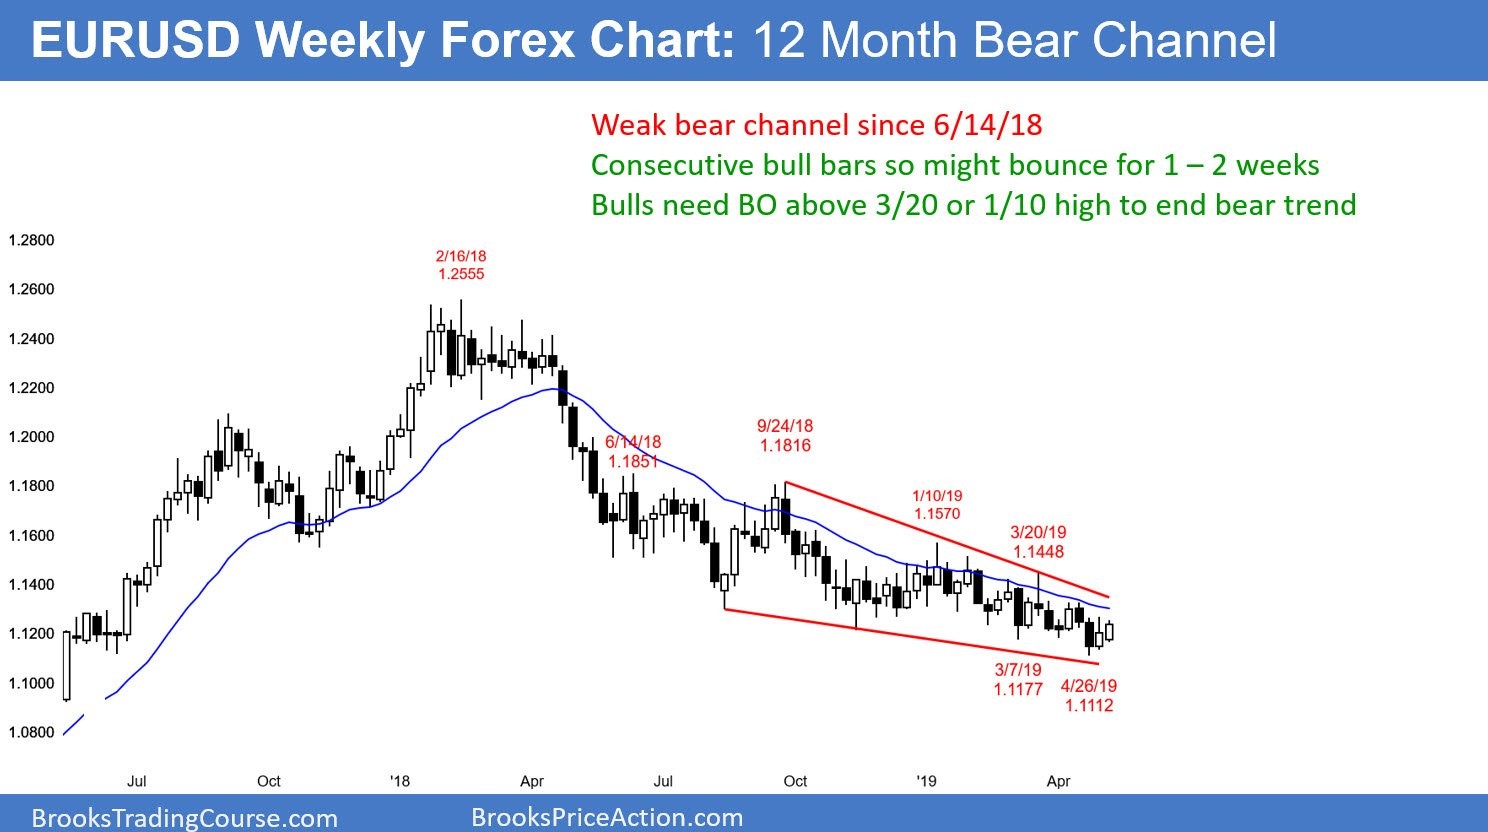 EURUSD-weekly-Forex-chart-in-12-month-bear-channel